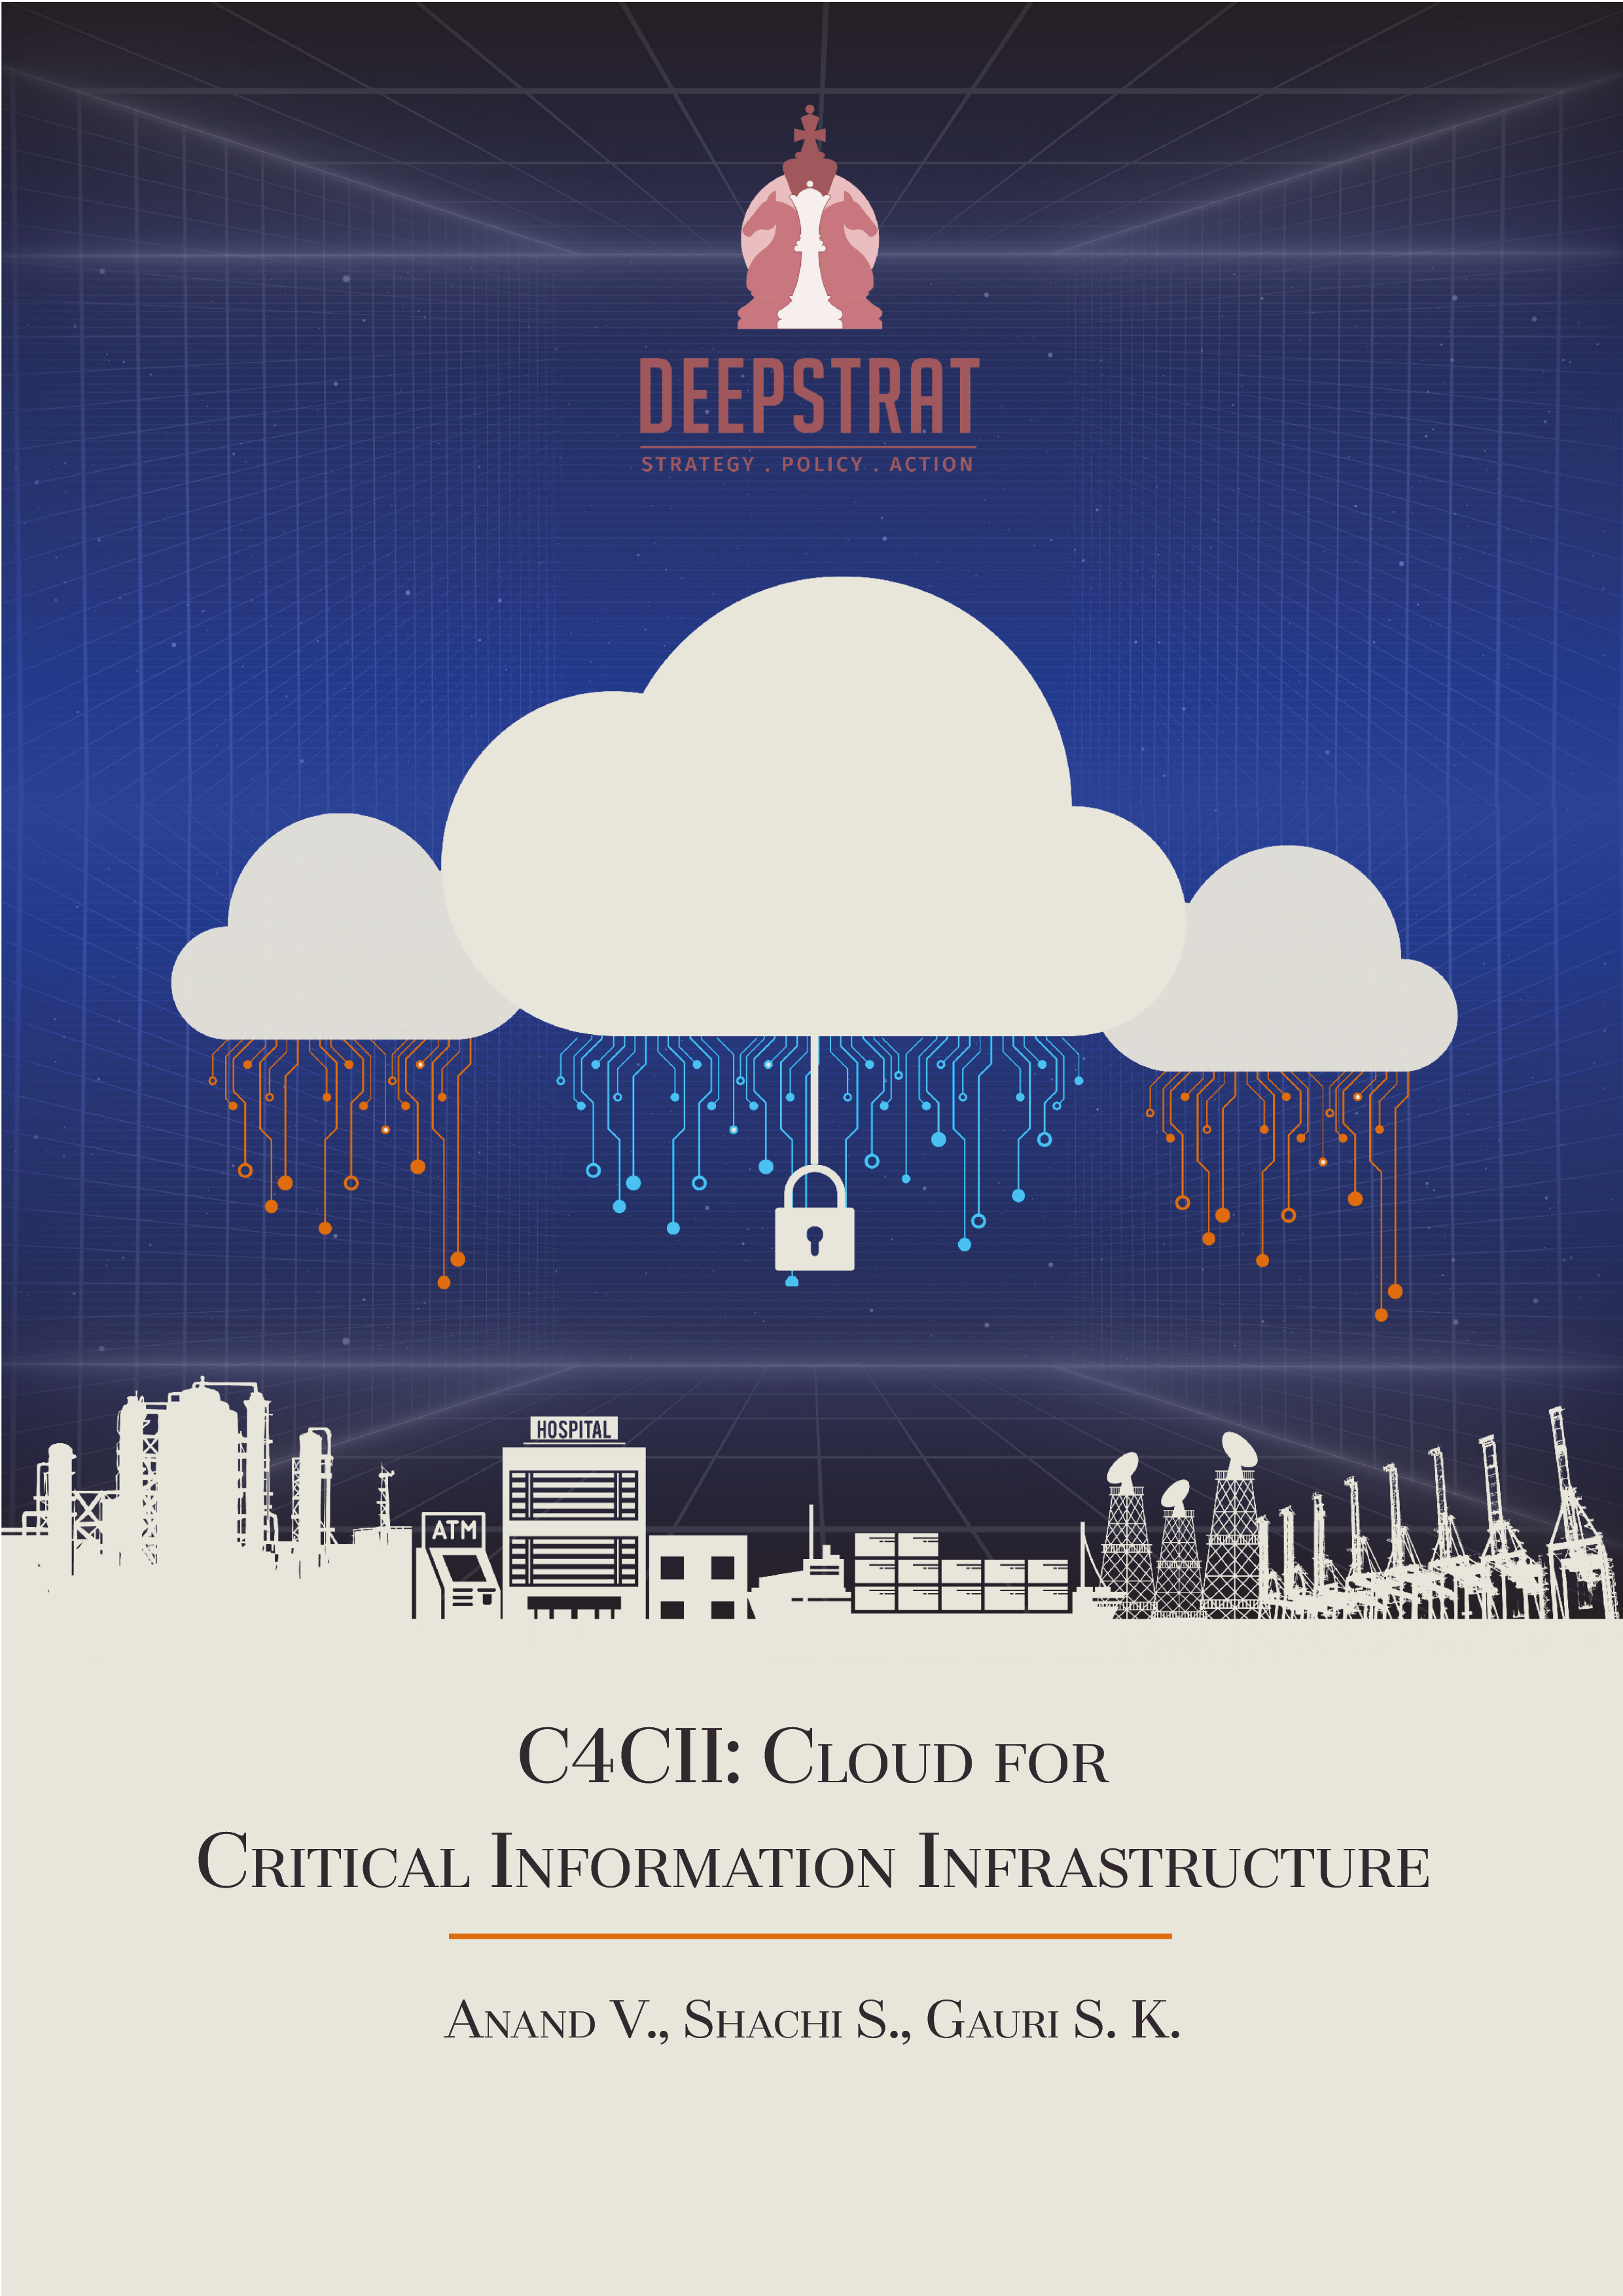 C4CII: Cloud for Critical Information Infrastructure